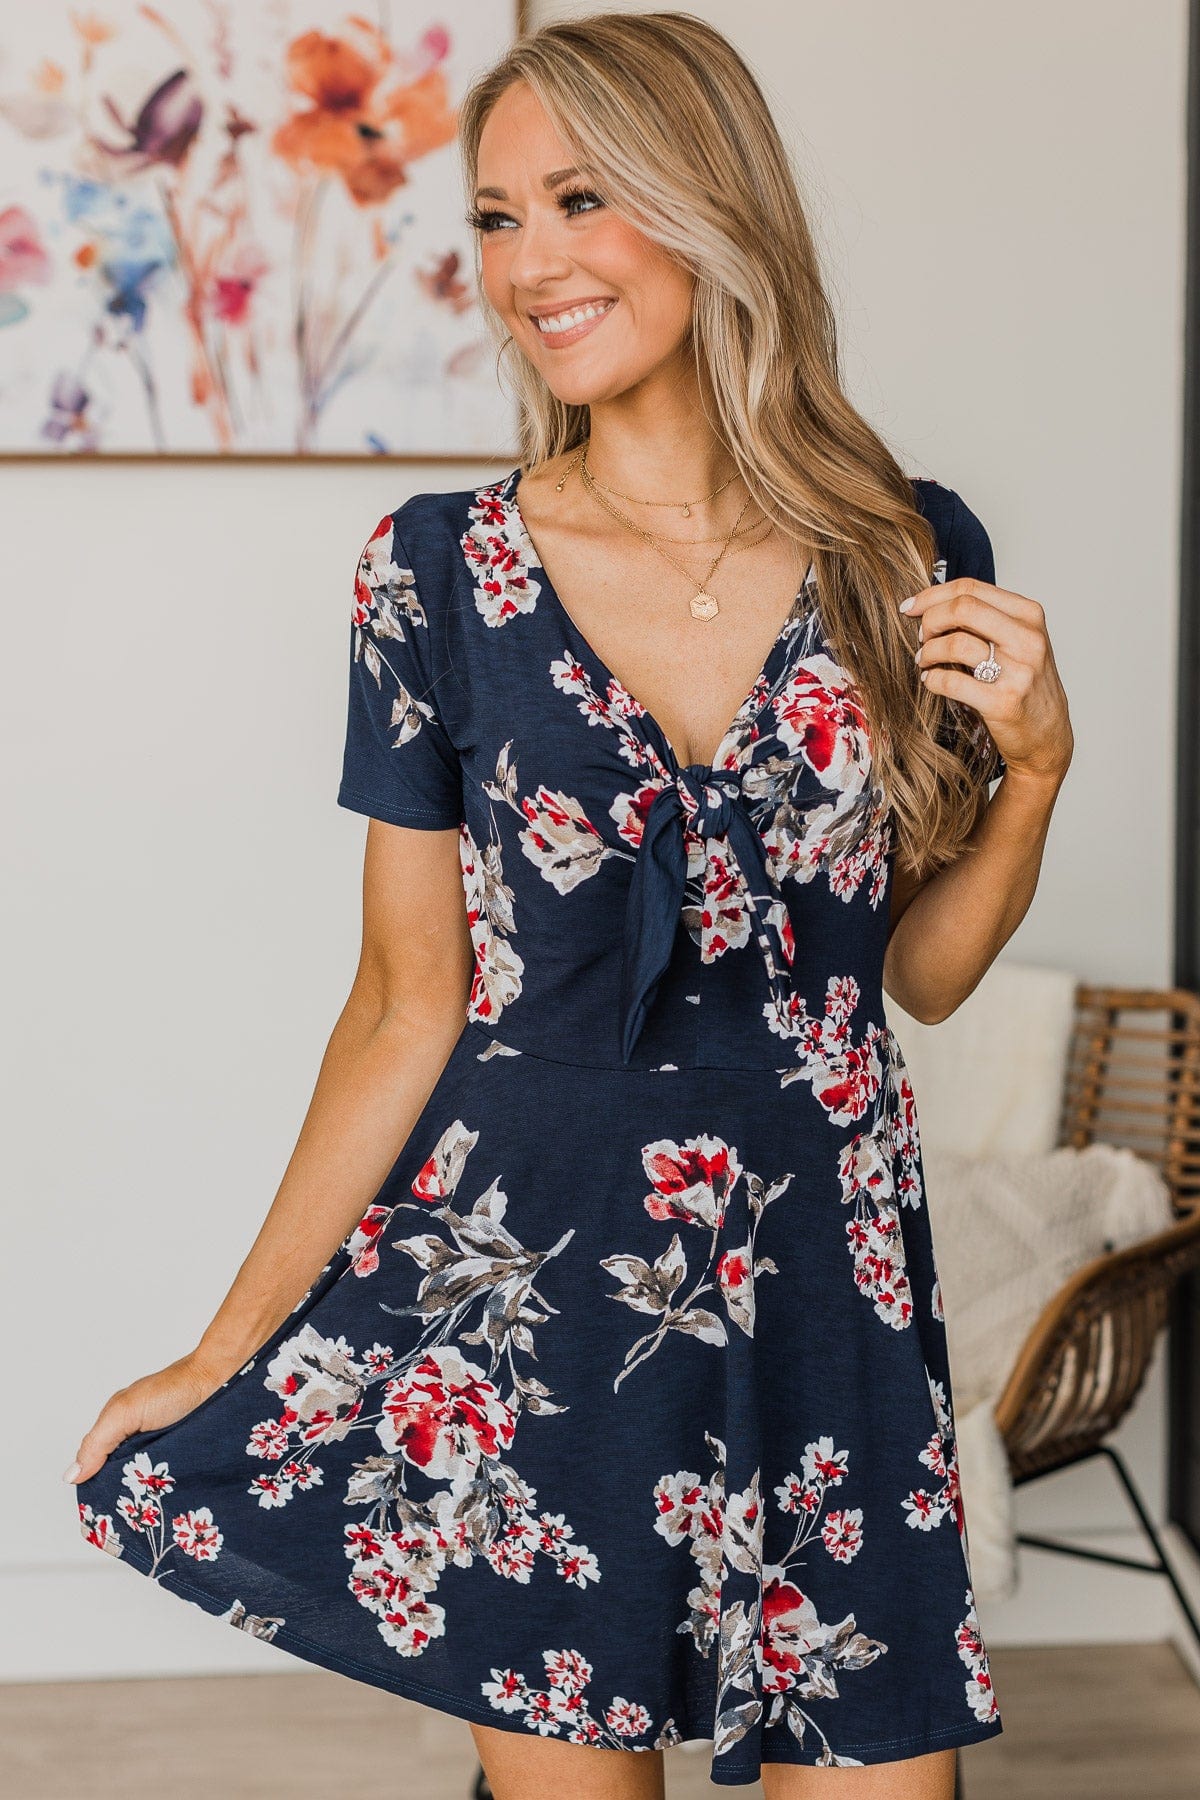 Meant For More Floral Dress- Dark Navy